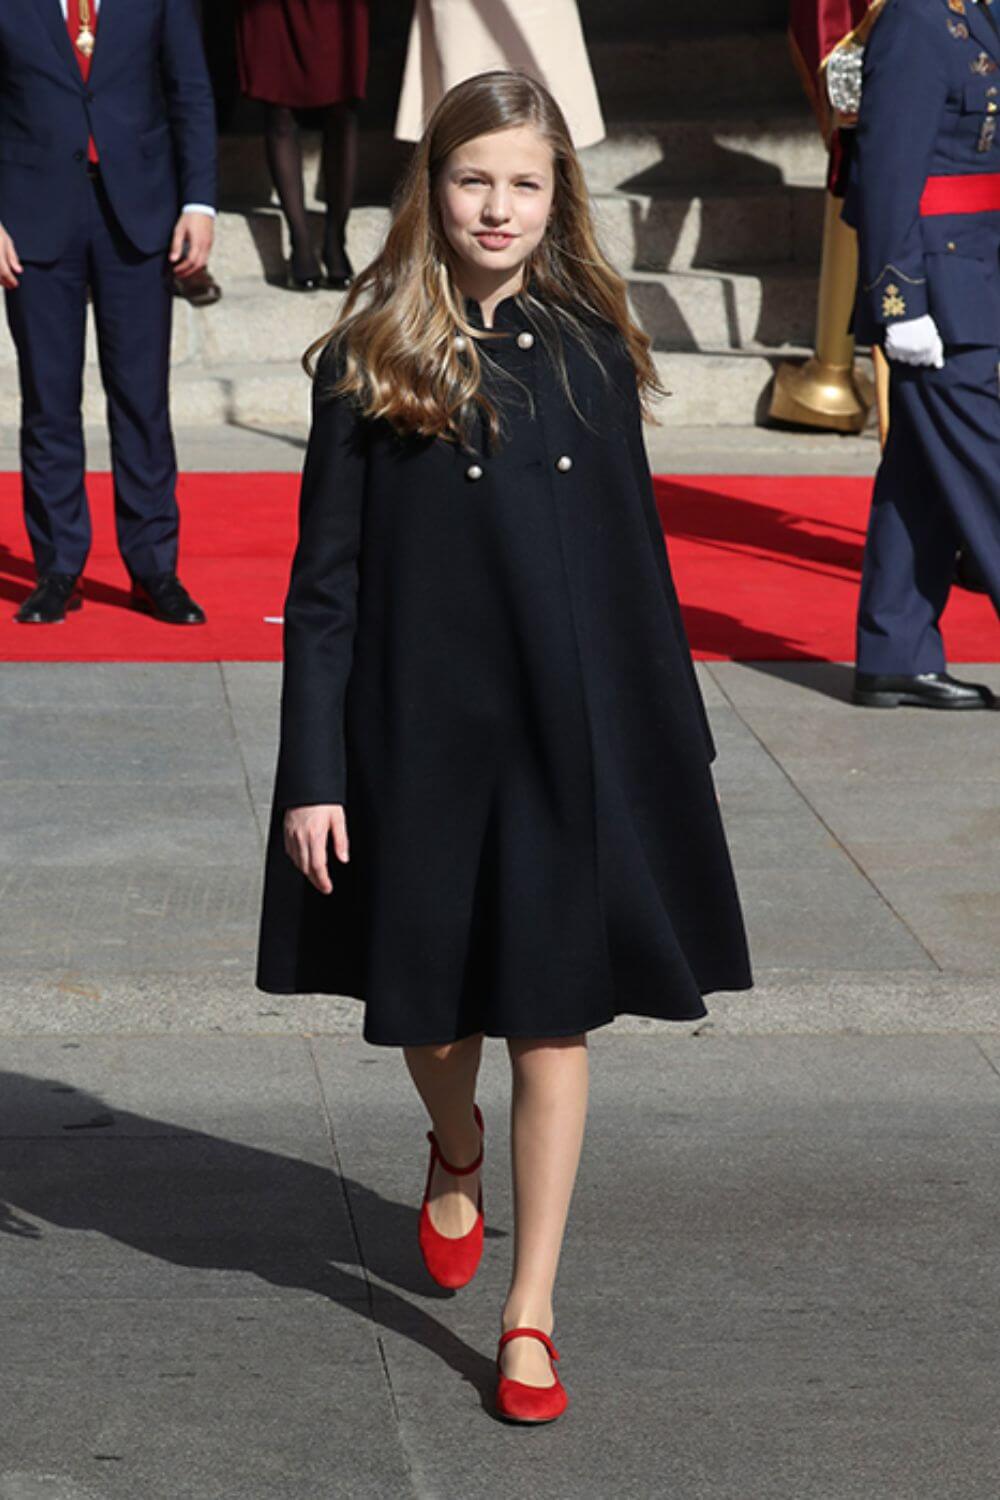 Princess Leonor in a sophisticated black gown